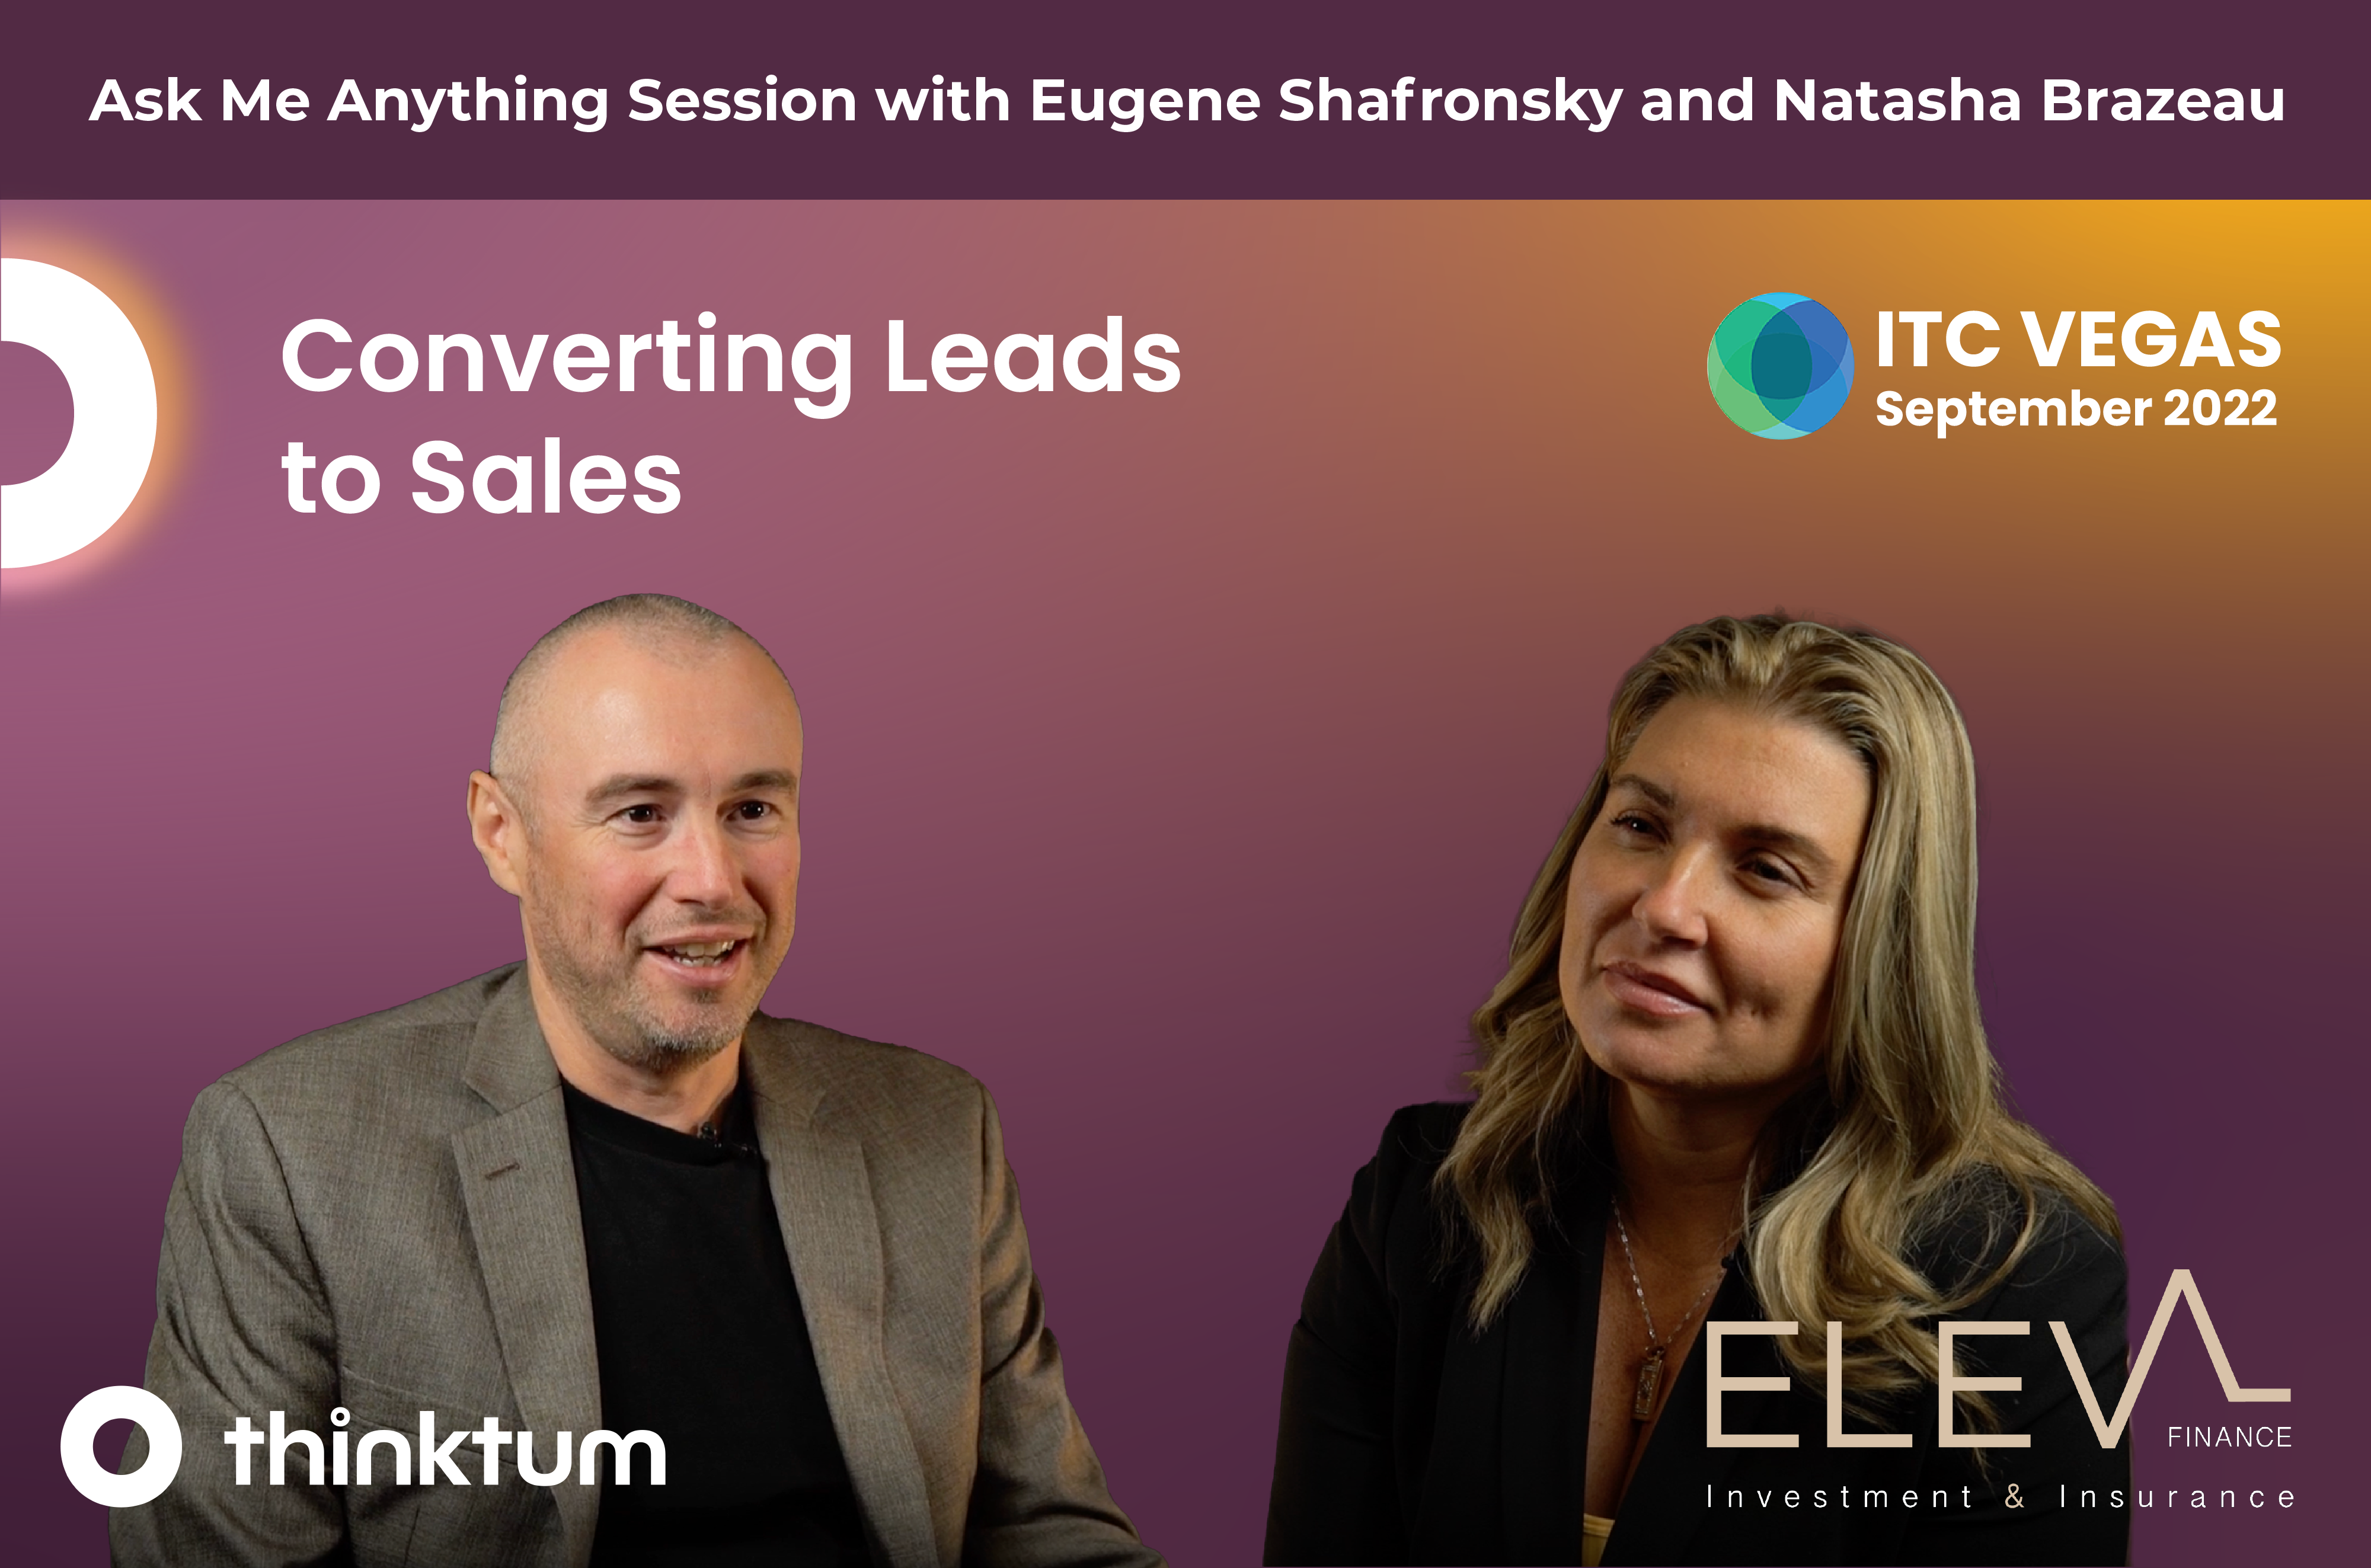 Ad for the Ask Me Anything session with thinktum's Eugene Shafronsky and Eleva Finance's CEO Natasha Brazeau titled Converting Leads to Sales and the thinktum, Eleva Finance, and ITC Vegas 2022 logos.